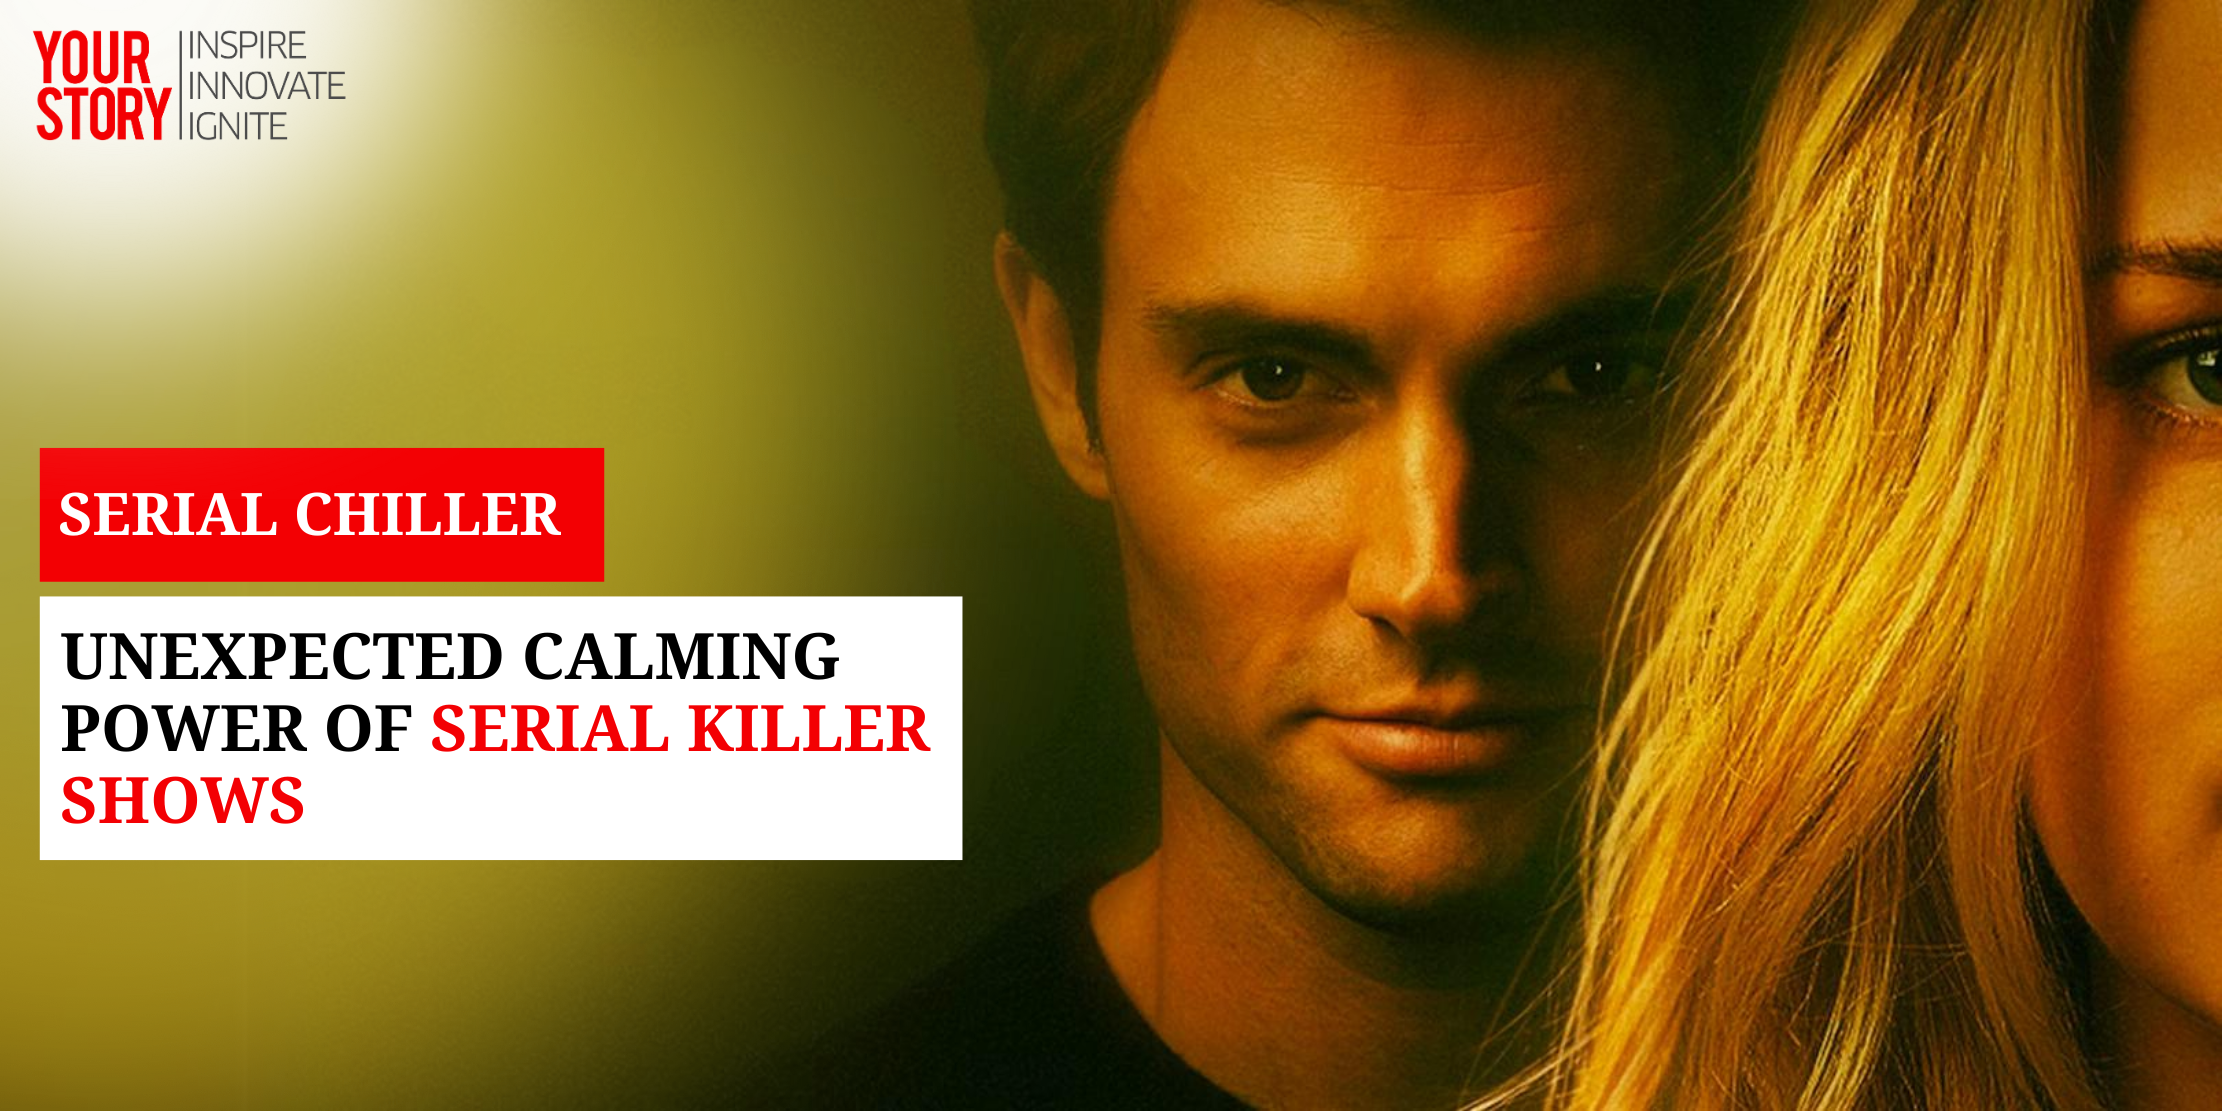 Serial Chillers: Unexpected Calming Power of Serial Killer Shows